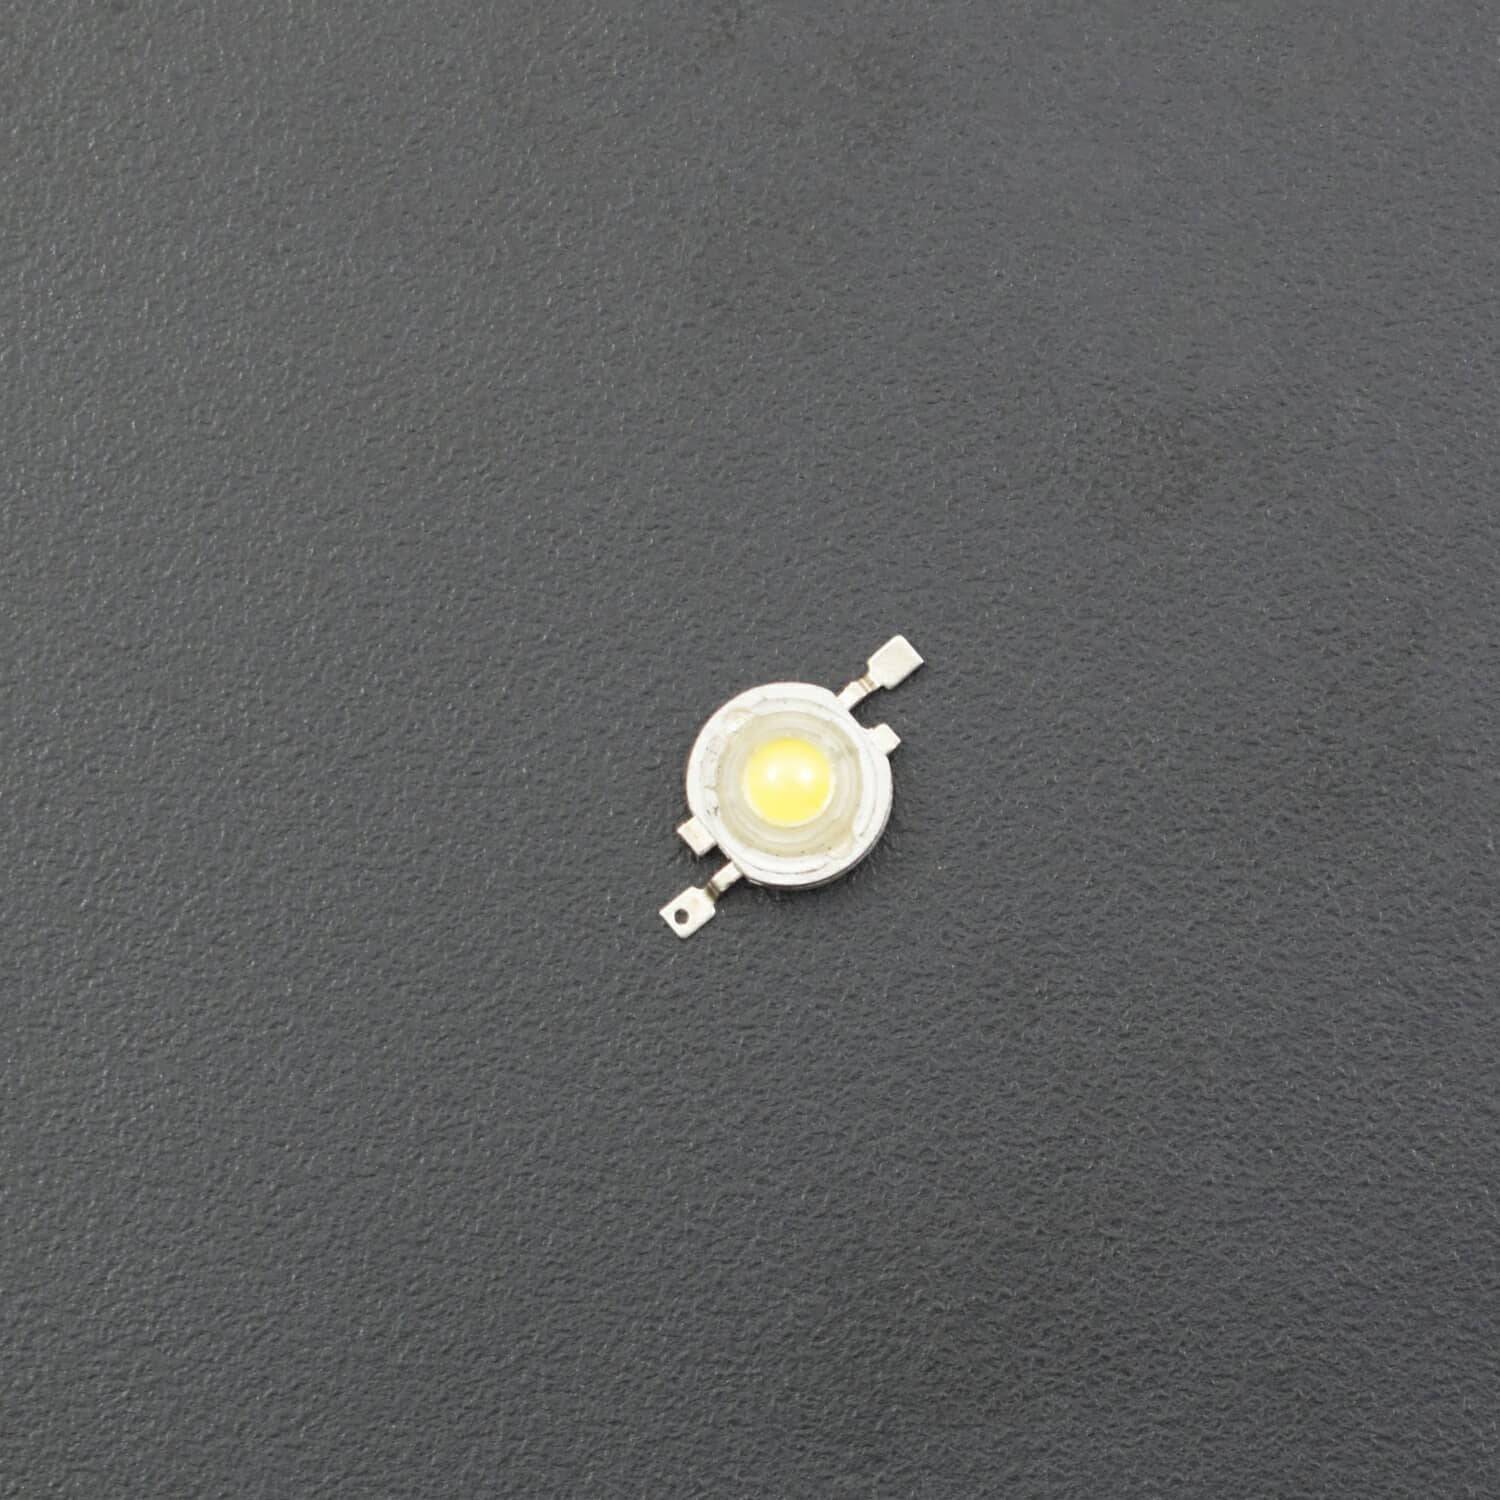 1 W Yellow 1w Power Led, Hb-100hry10-M3  - RS1650 - REES52